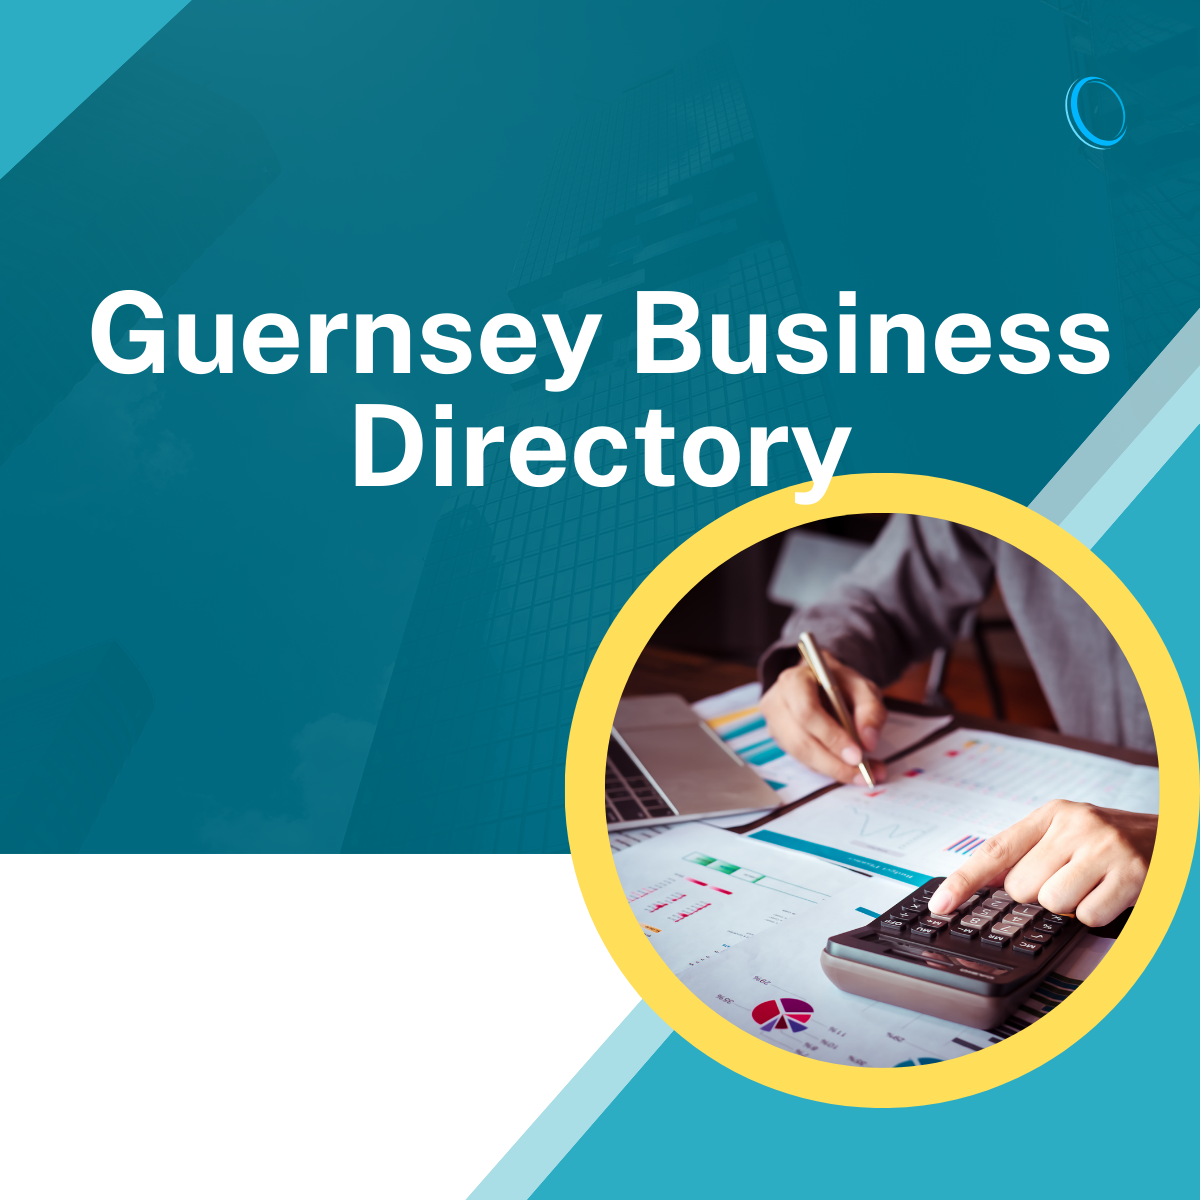 20 Active business directory & listing sites in Guernsey